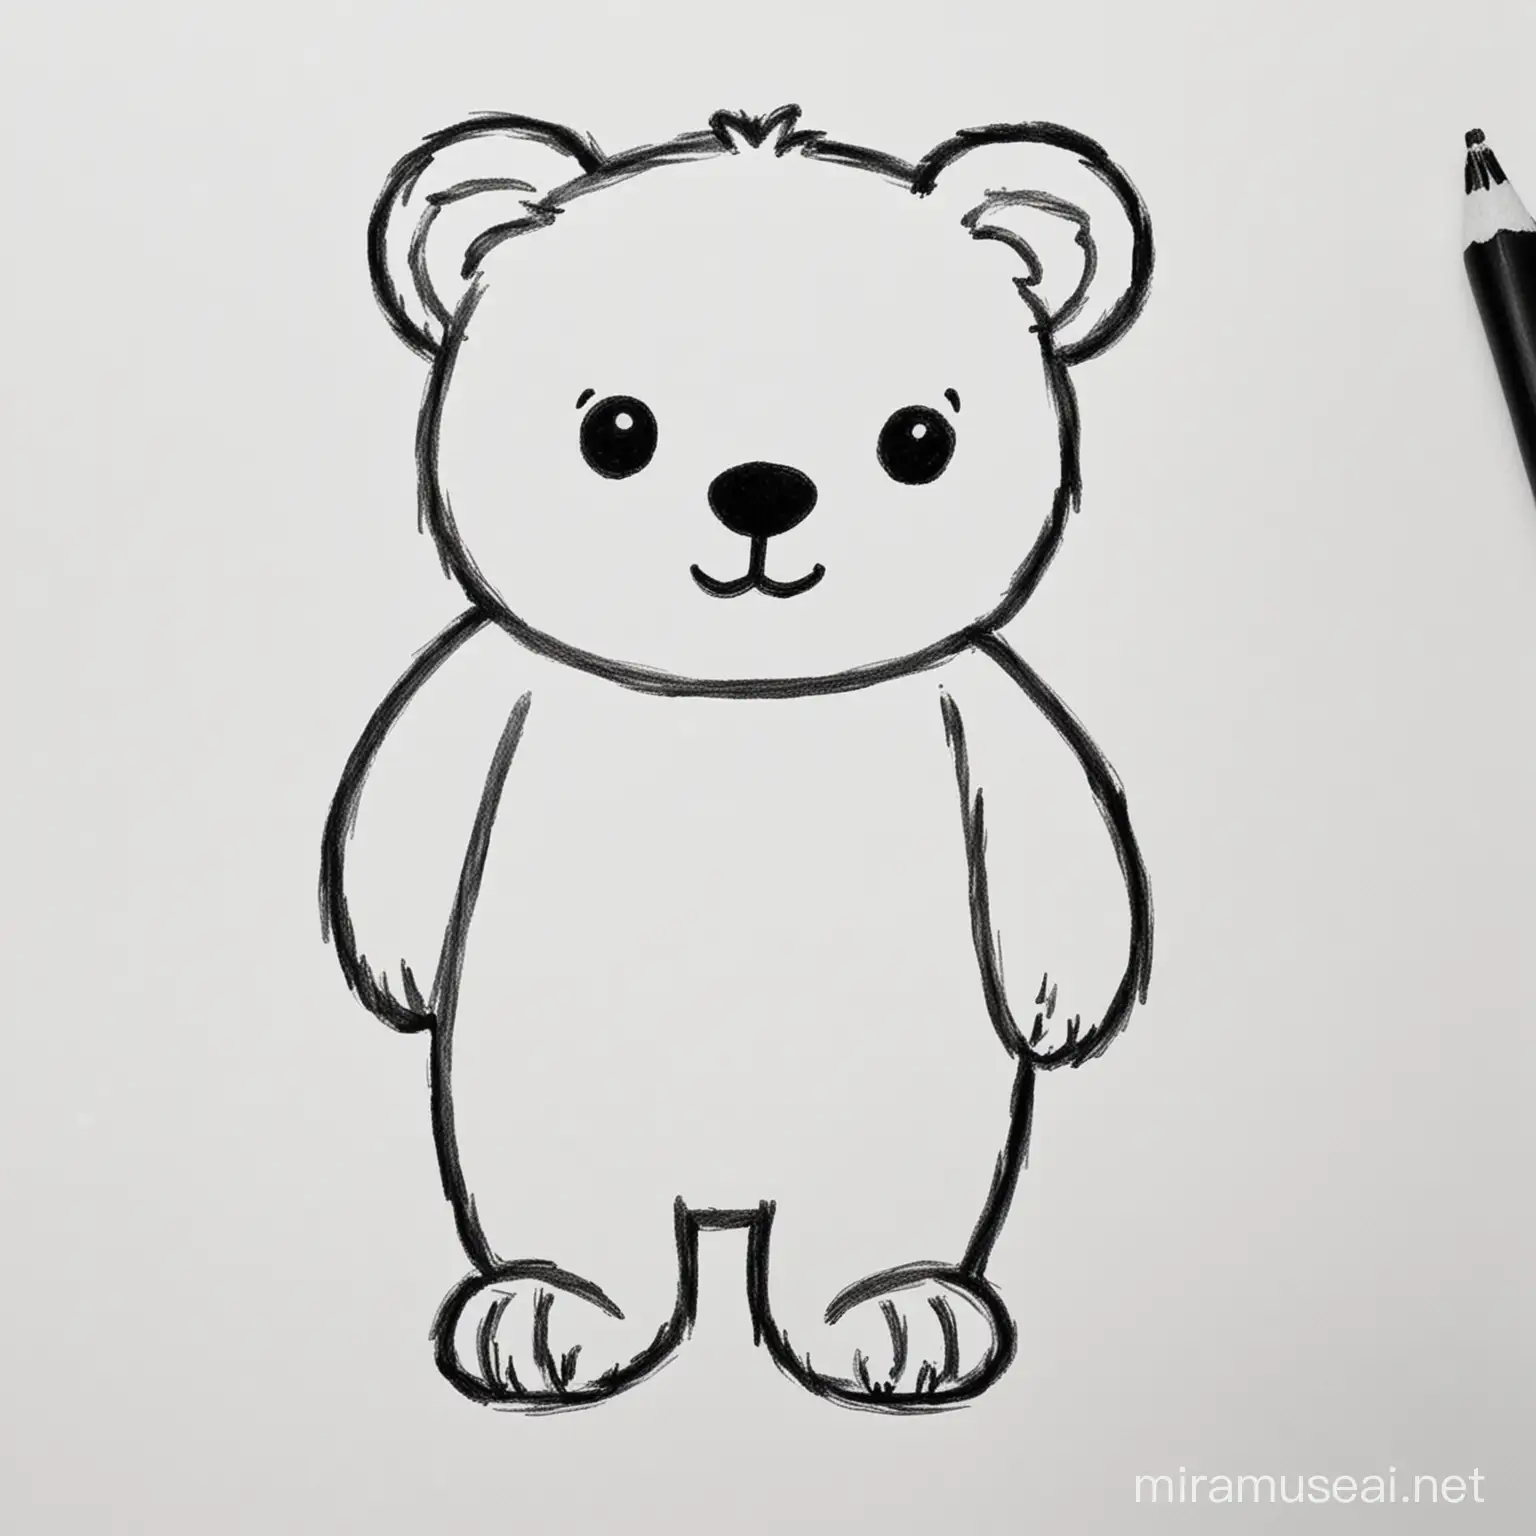 Cute Bear Themed Coloring Sheet for Children on White Background